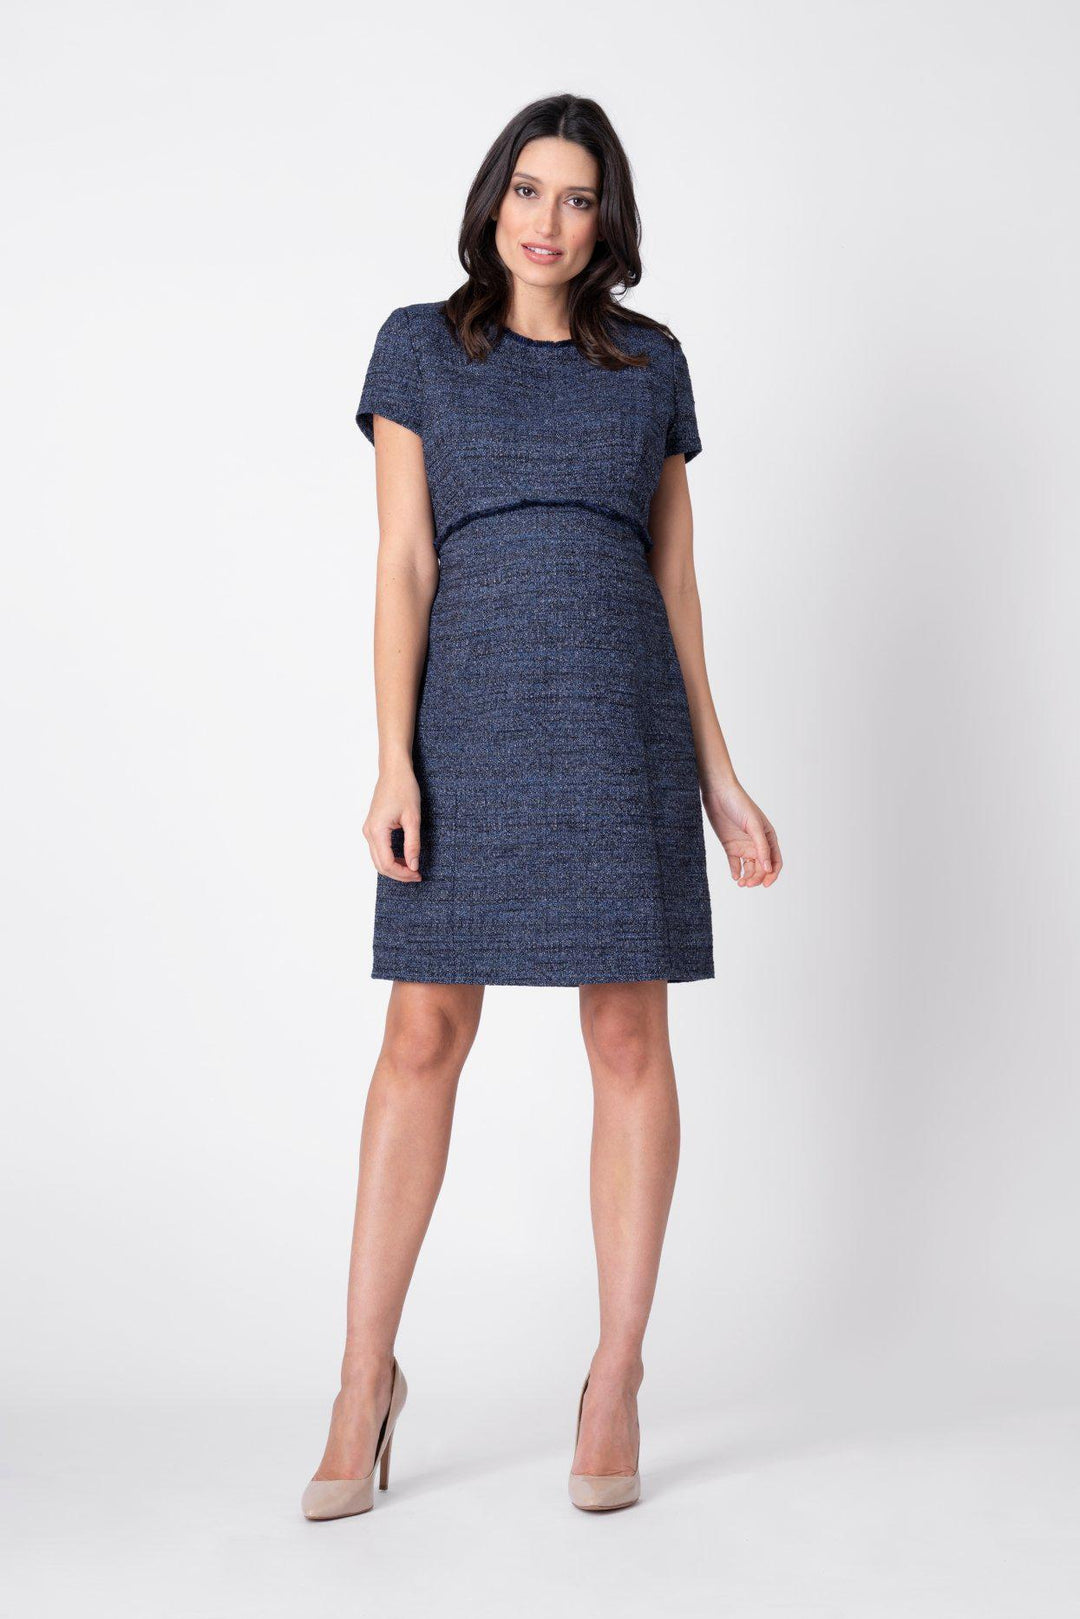 Kiara A Line tweed dress-Dress-Seraphine-Expectations Copenhagen - pregnant fashion - expecting in style